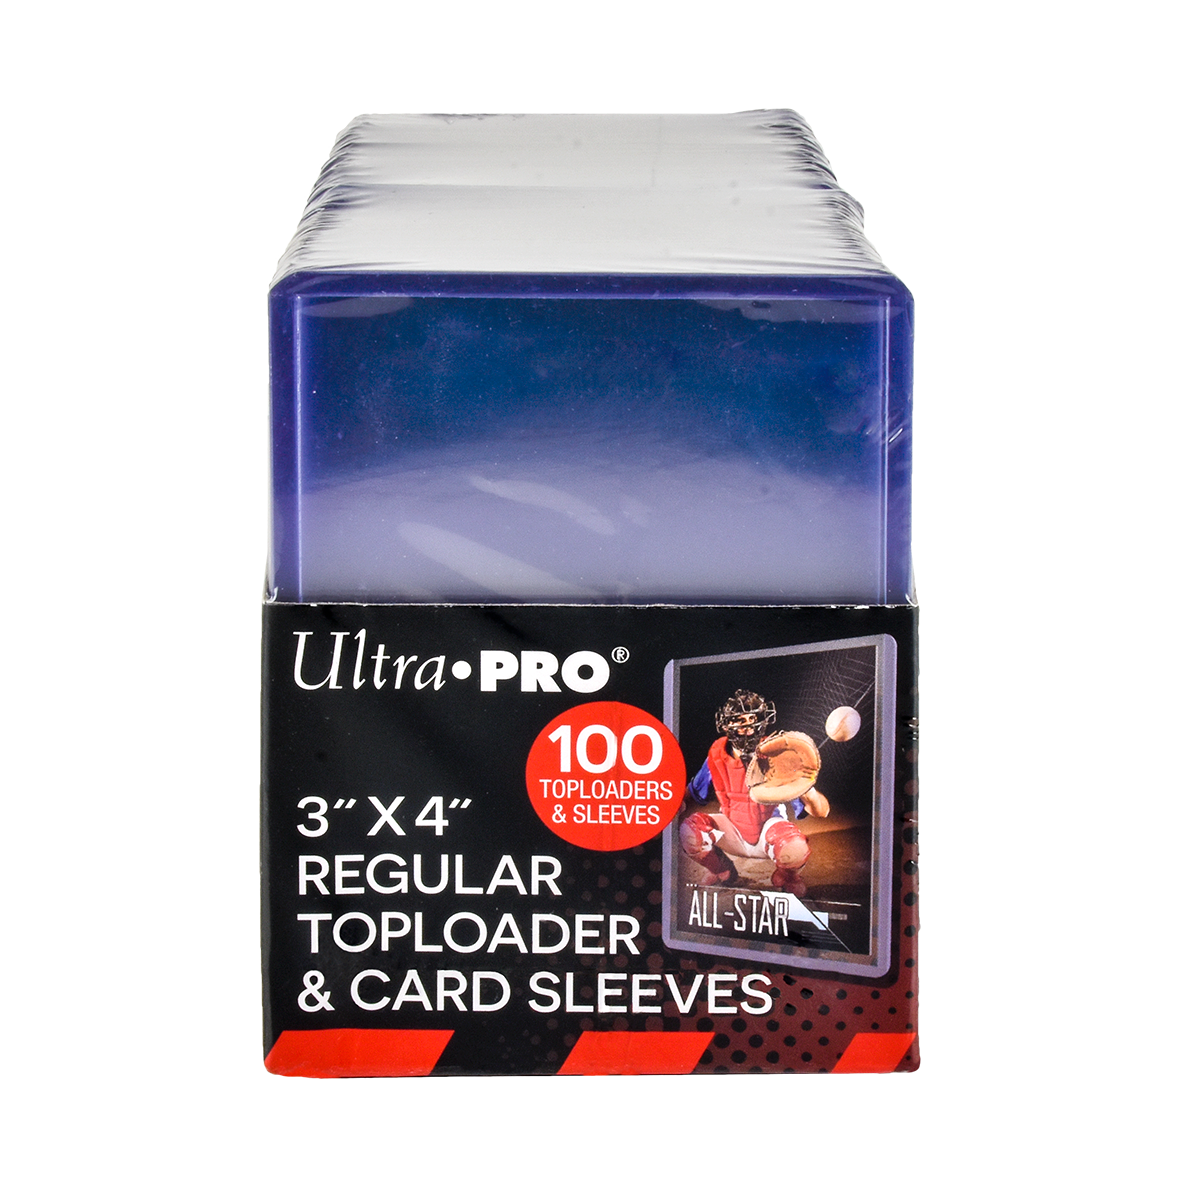 3" x 4" Clear Regular Toploaders and Soft Sleeves Bundle for Standard Size Cards (100 ct.) | Ultra PRO International